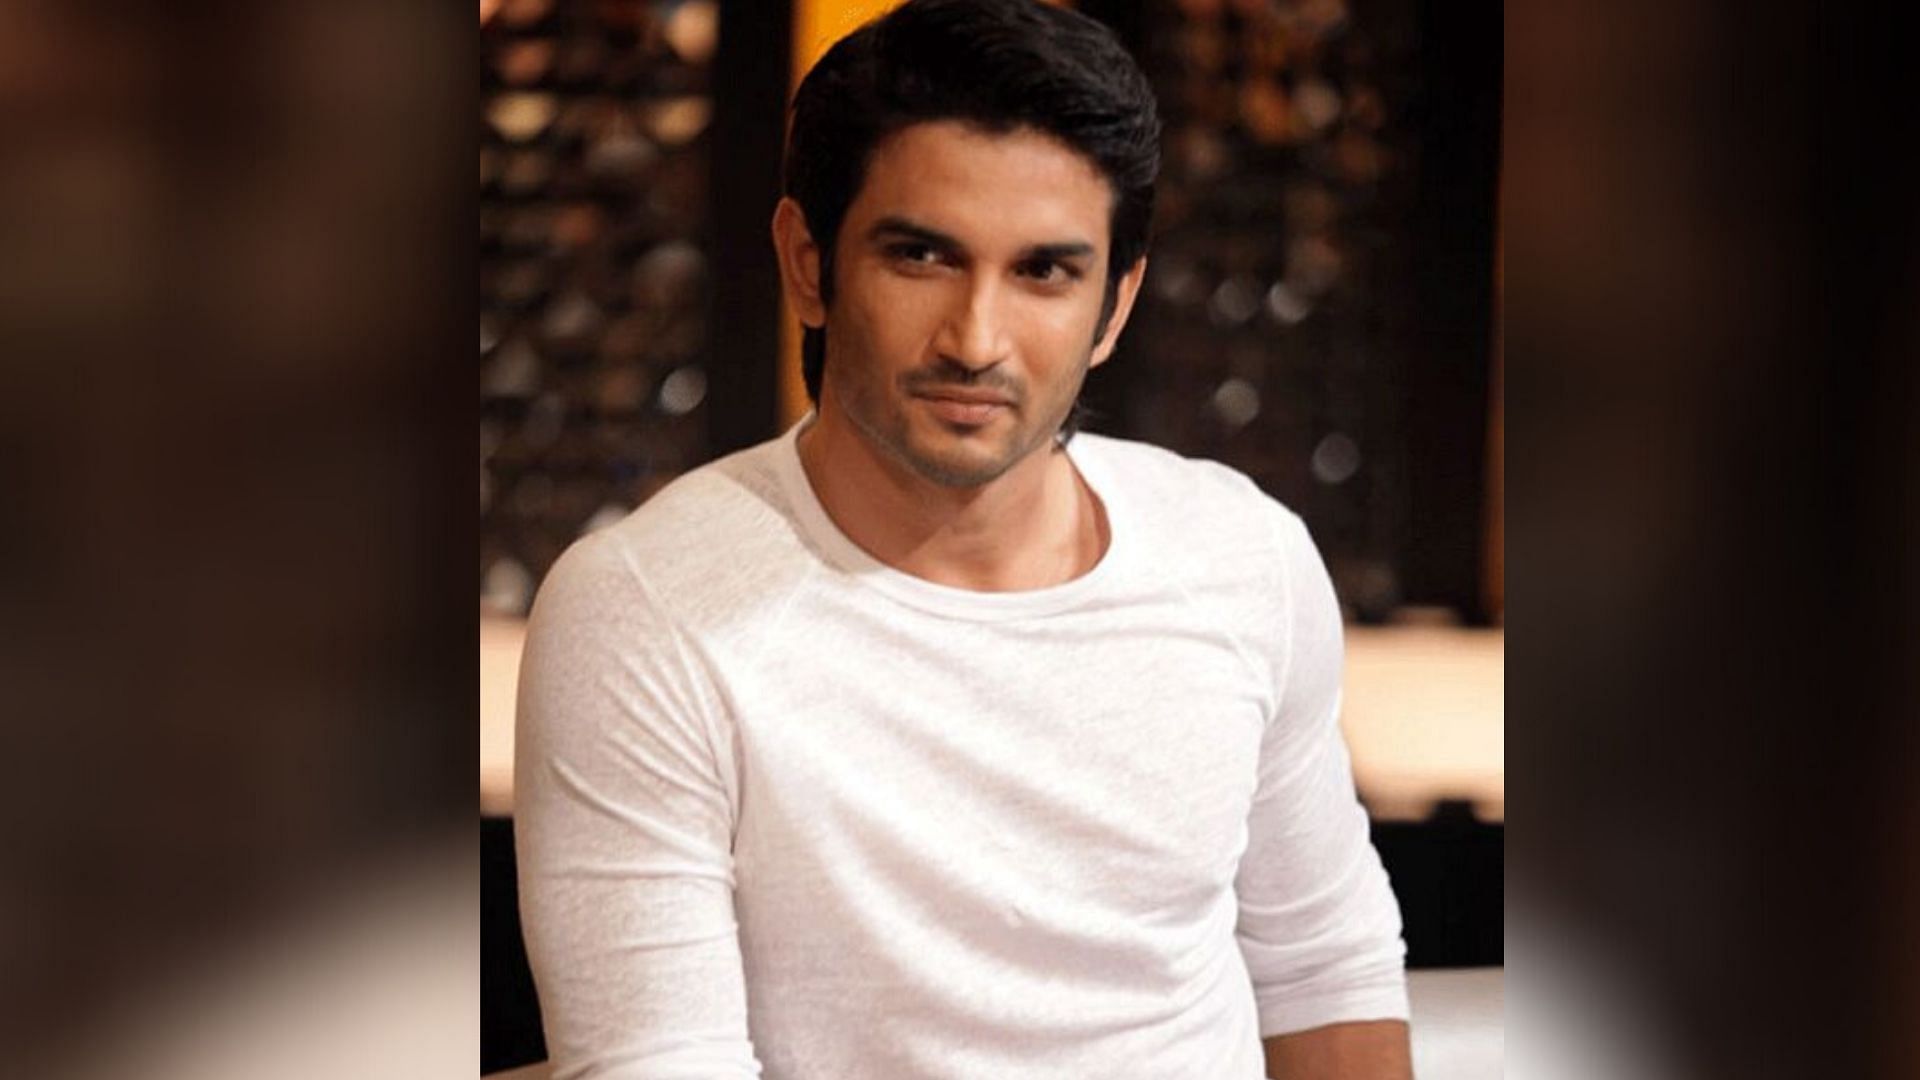 Actor Sushant Singh Rajput passed away at the age of 34.